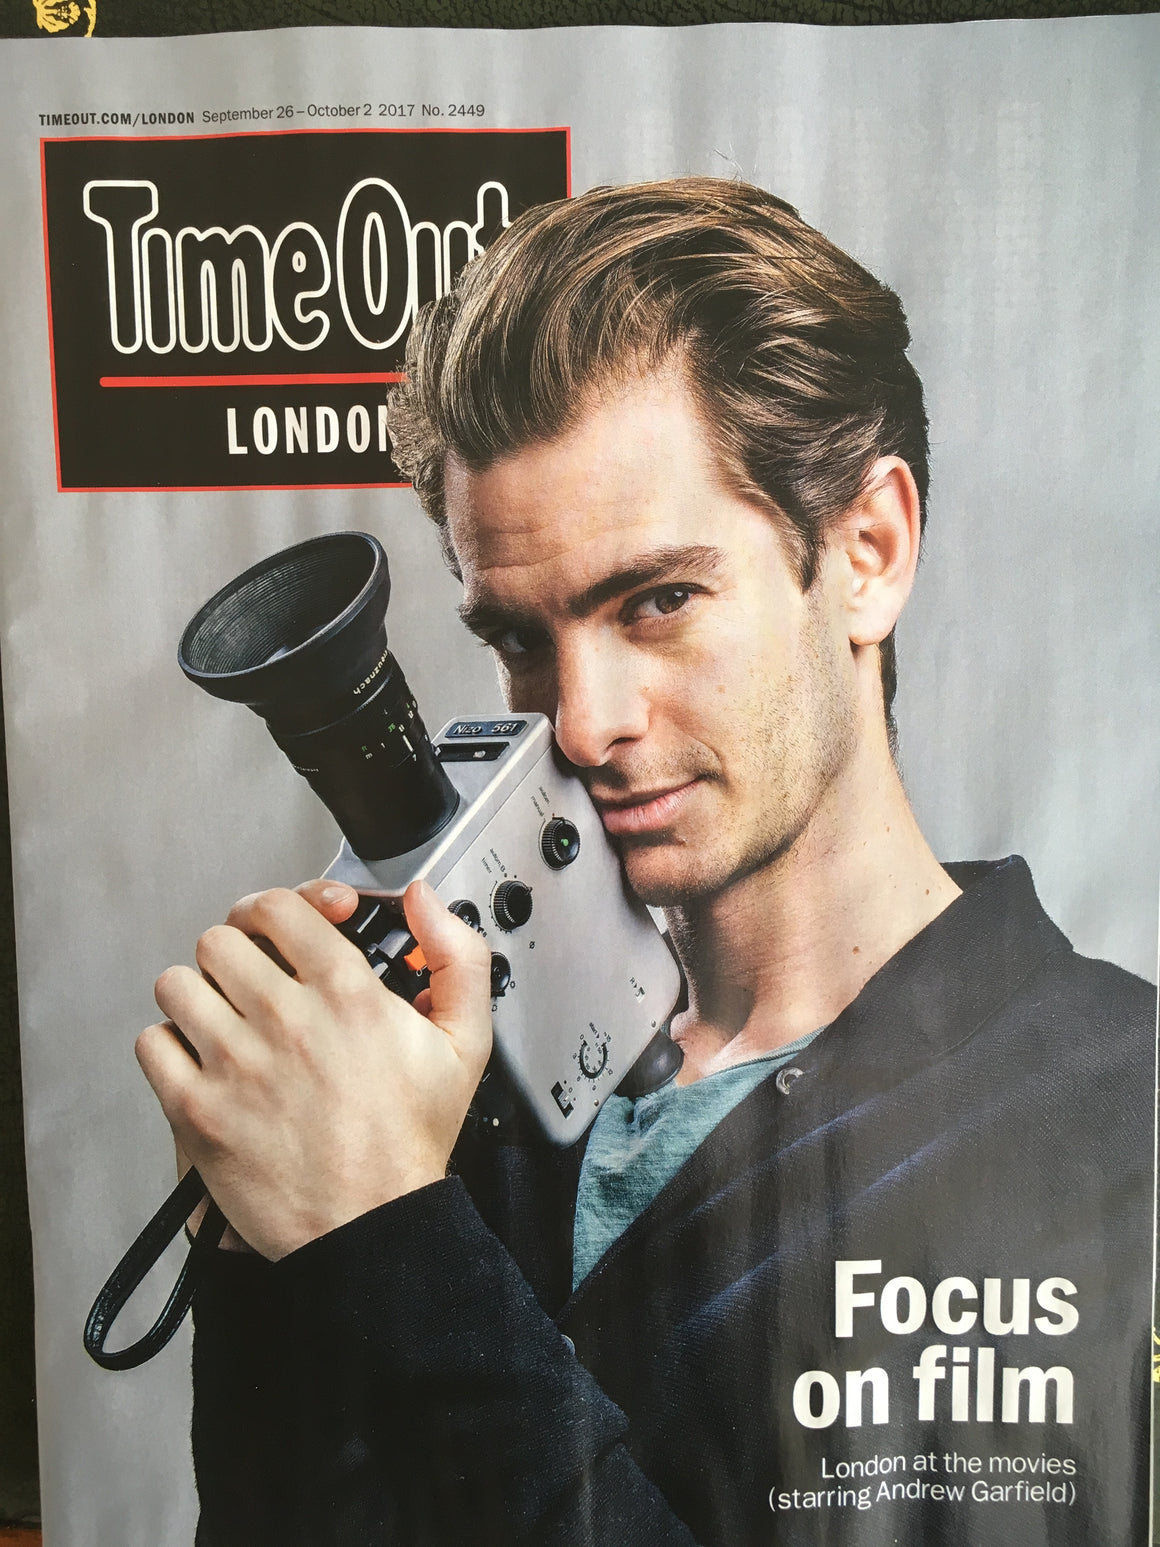 Andrew Garfield on the cover of Time Out Magazine